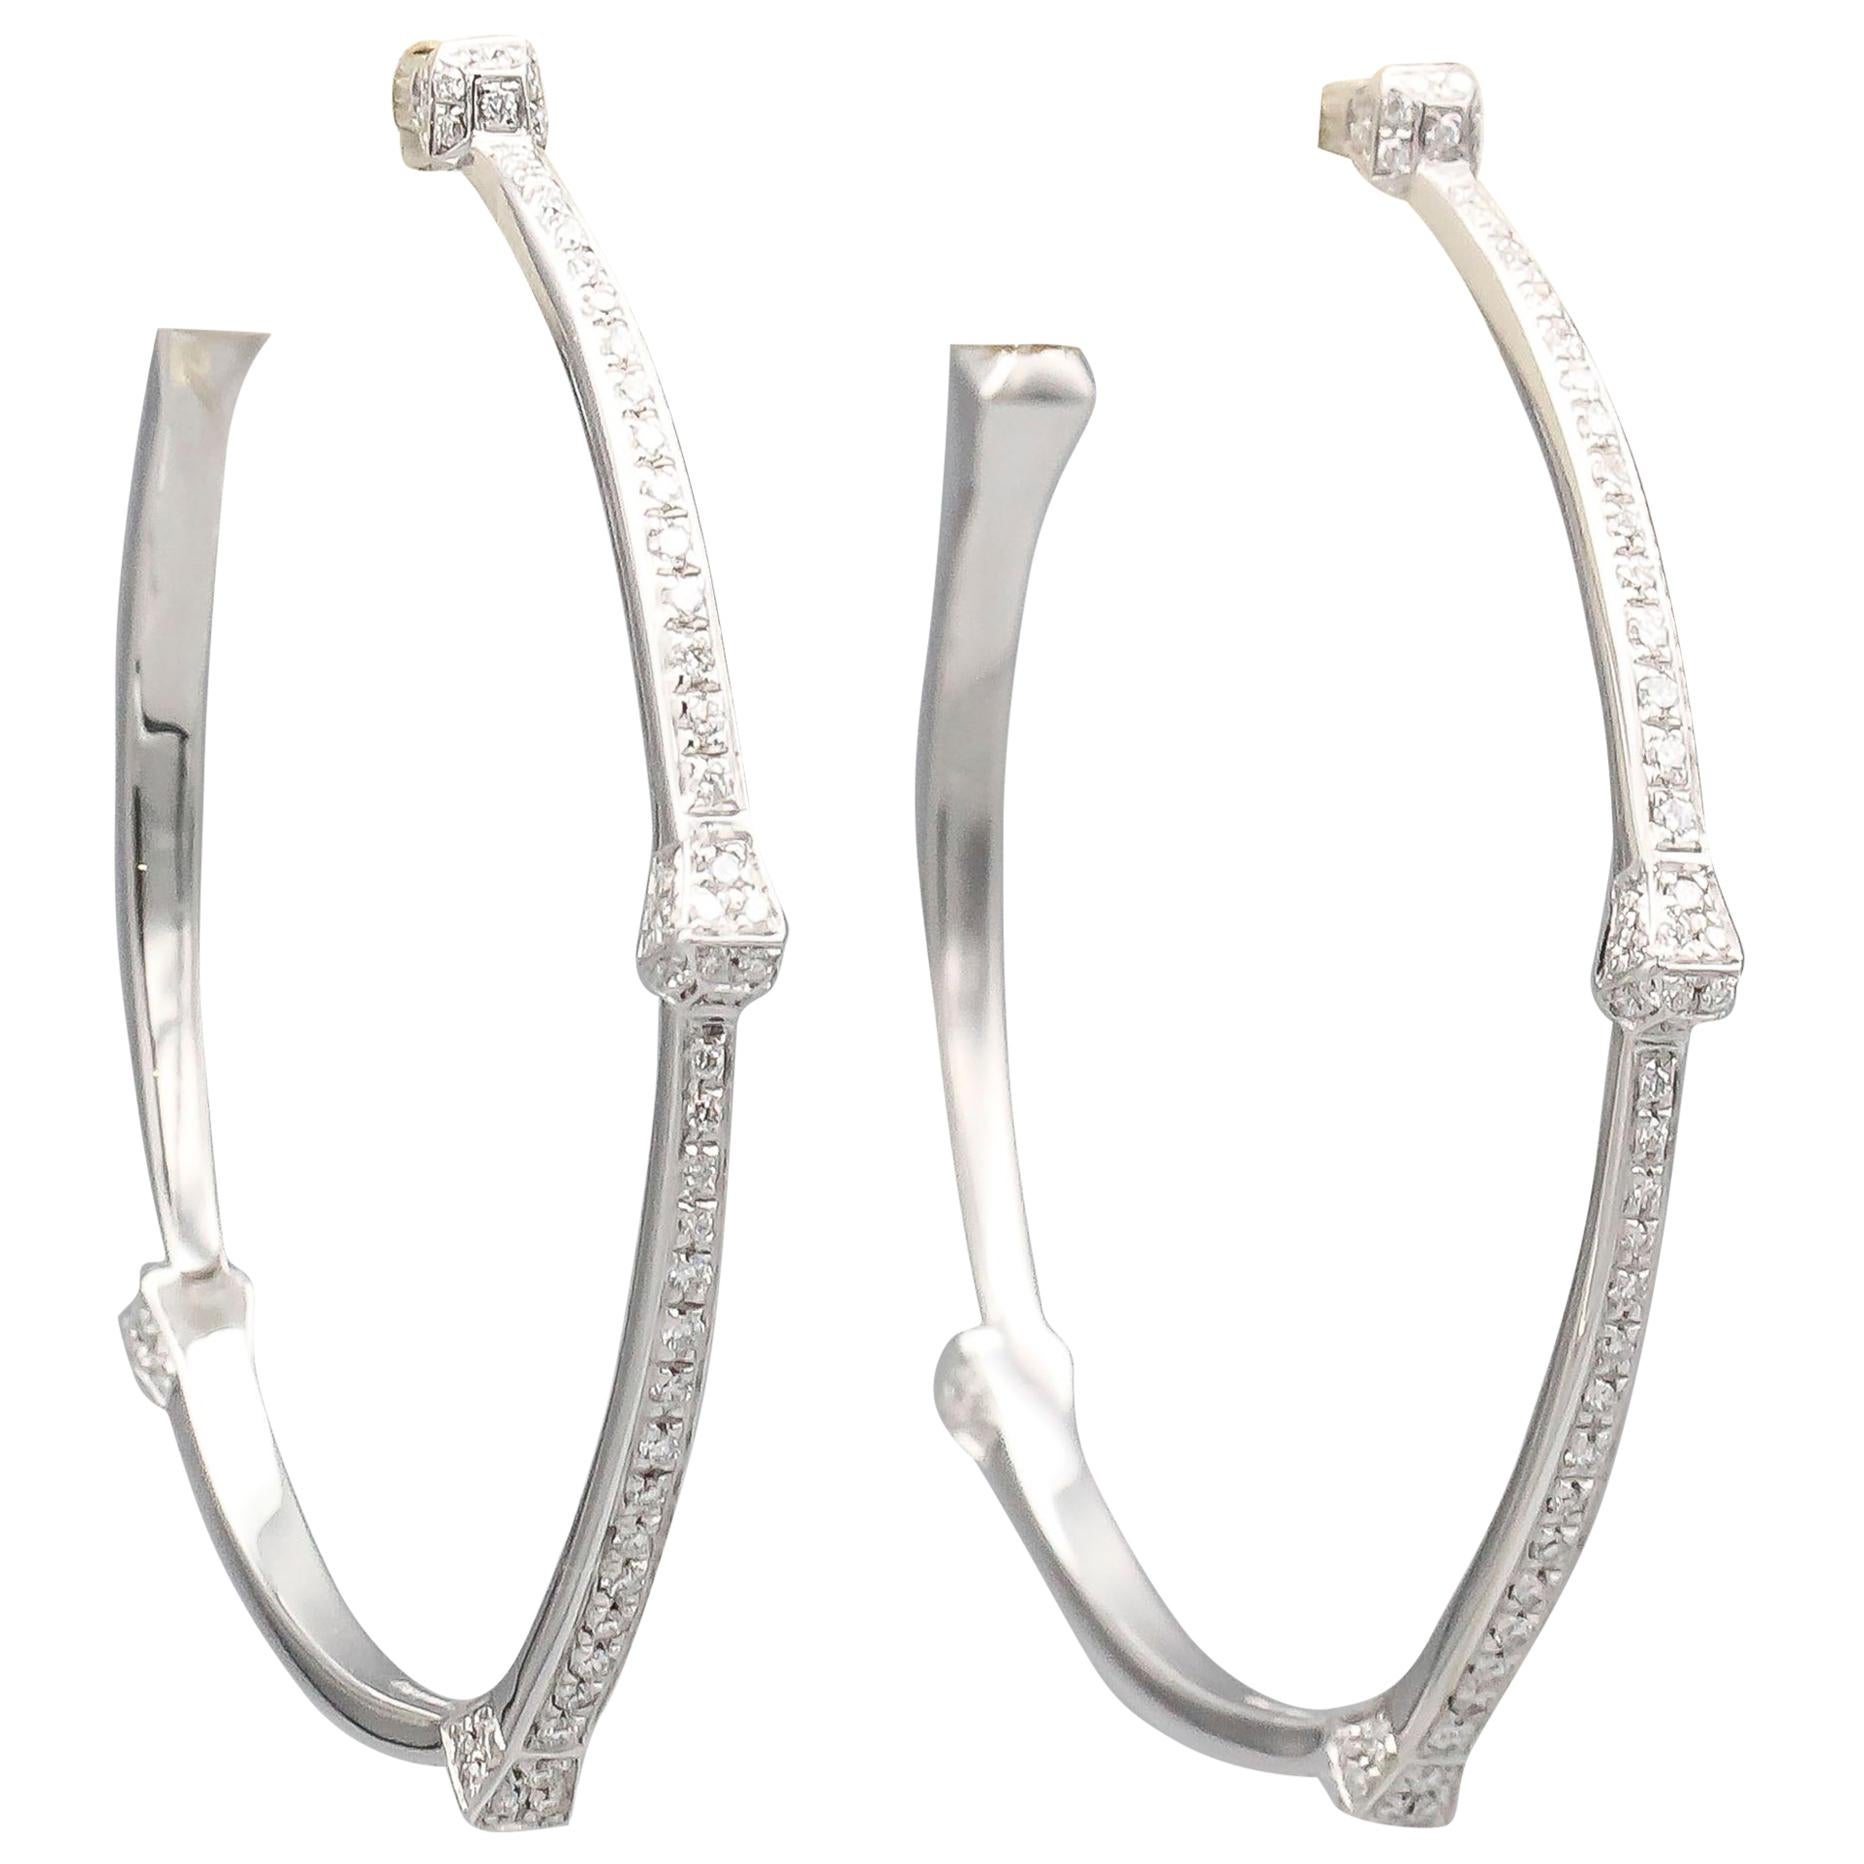 Gucci Chiodo Diamond and 18 Karat White Gold Hoops Earrings